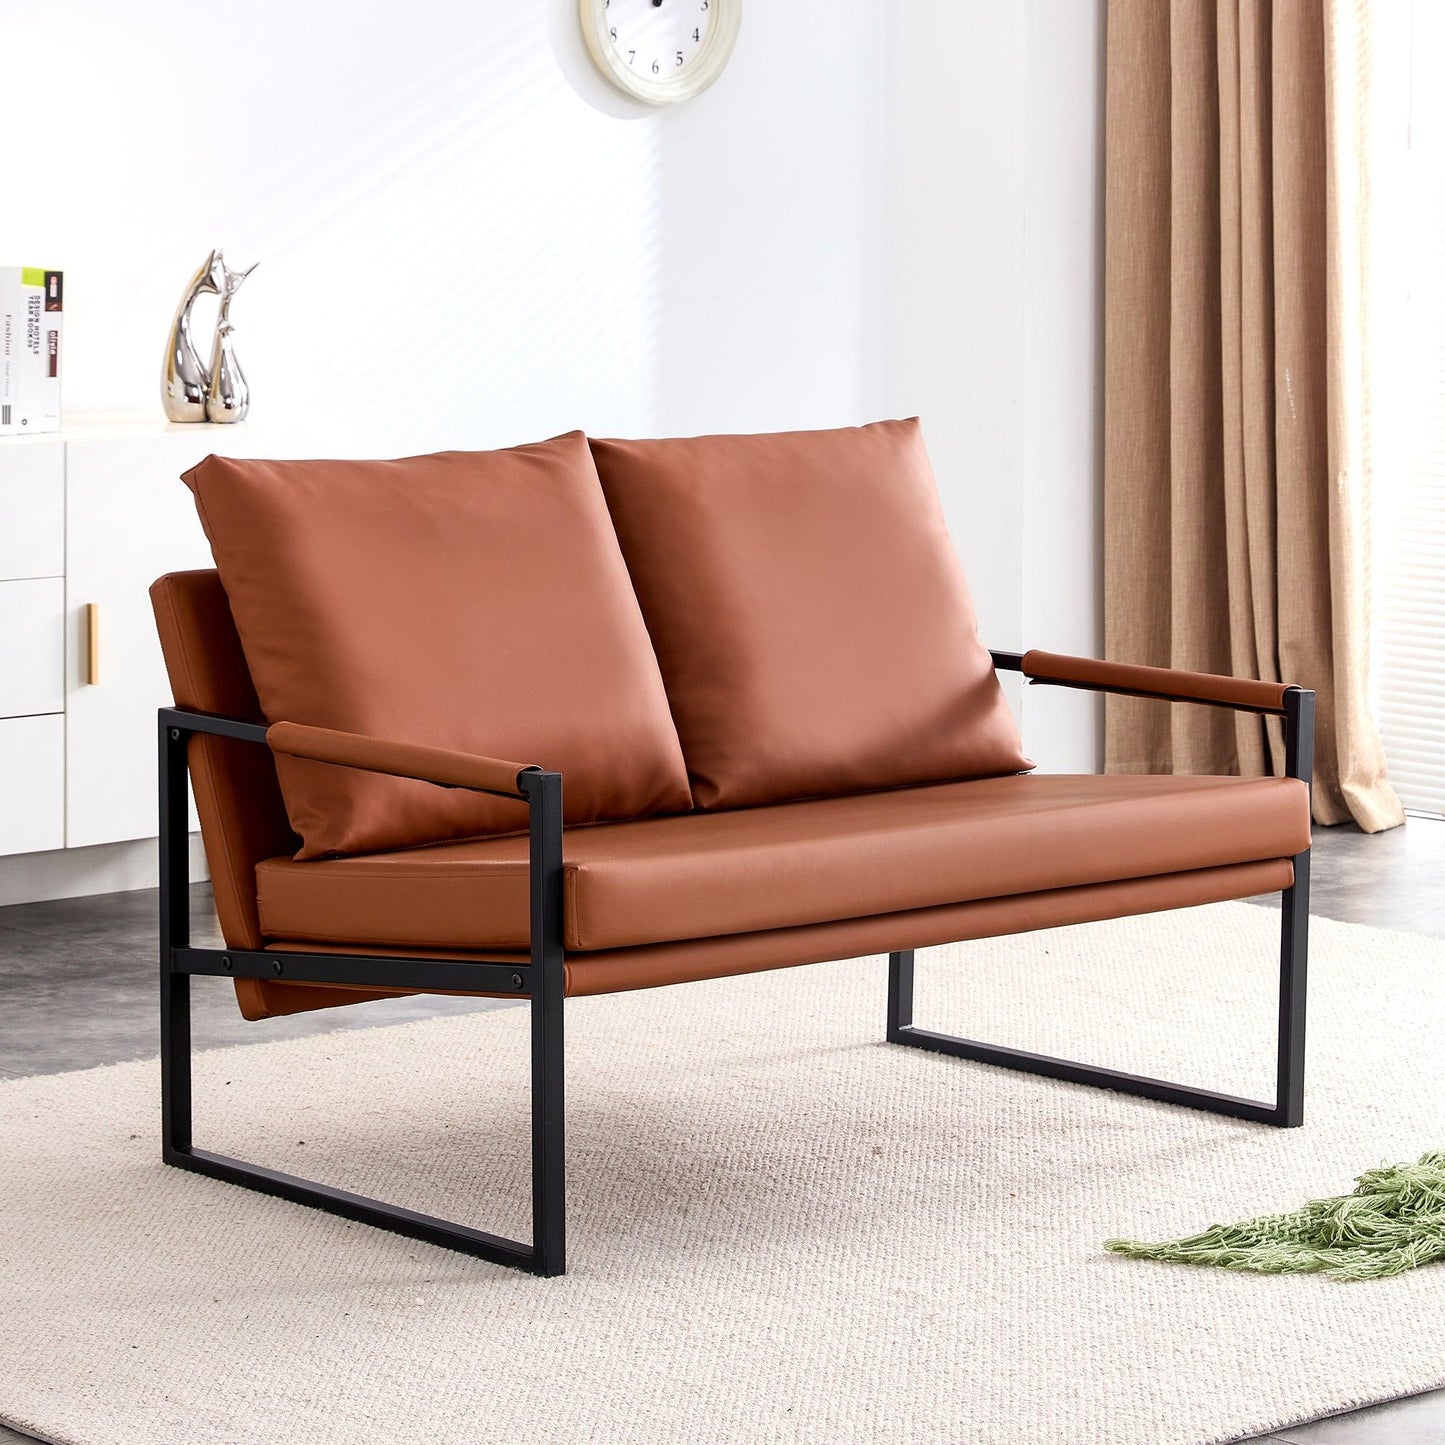 Modern Two-Seater Sofa Chair with 2 Pillows - PU Leather High-Density Foam Black Coated Metal Frame Brown - FurniFindUSA